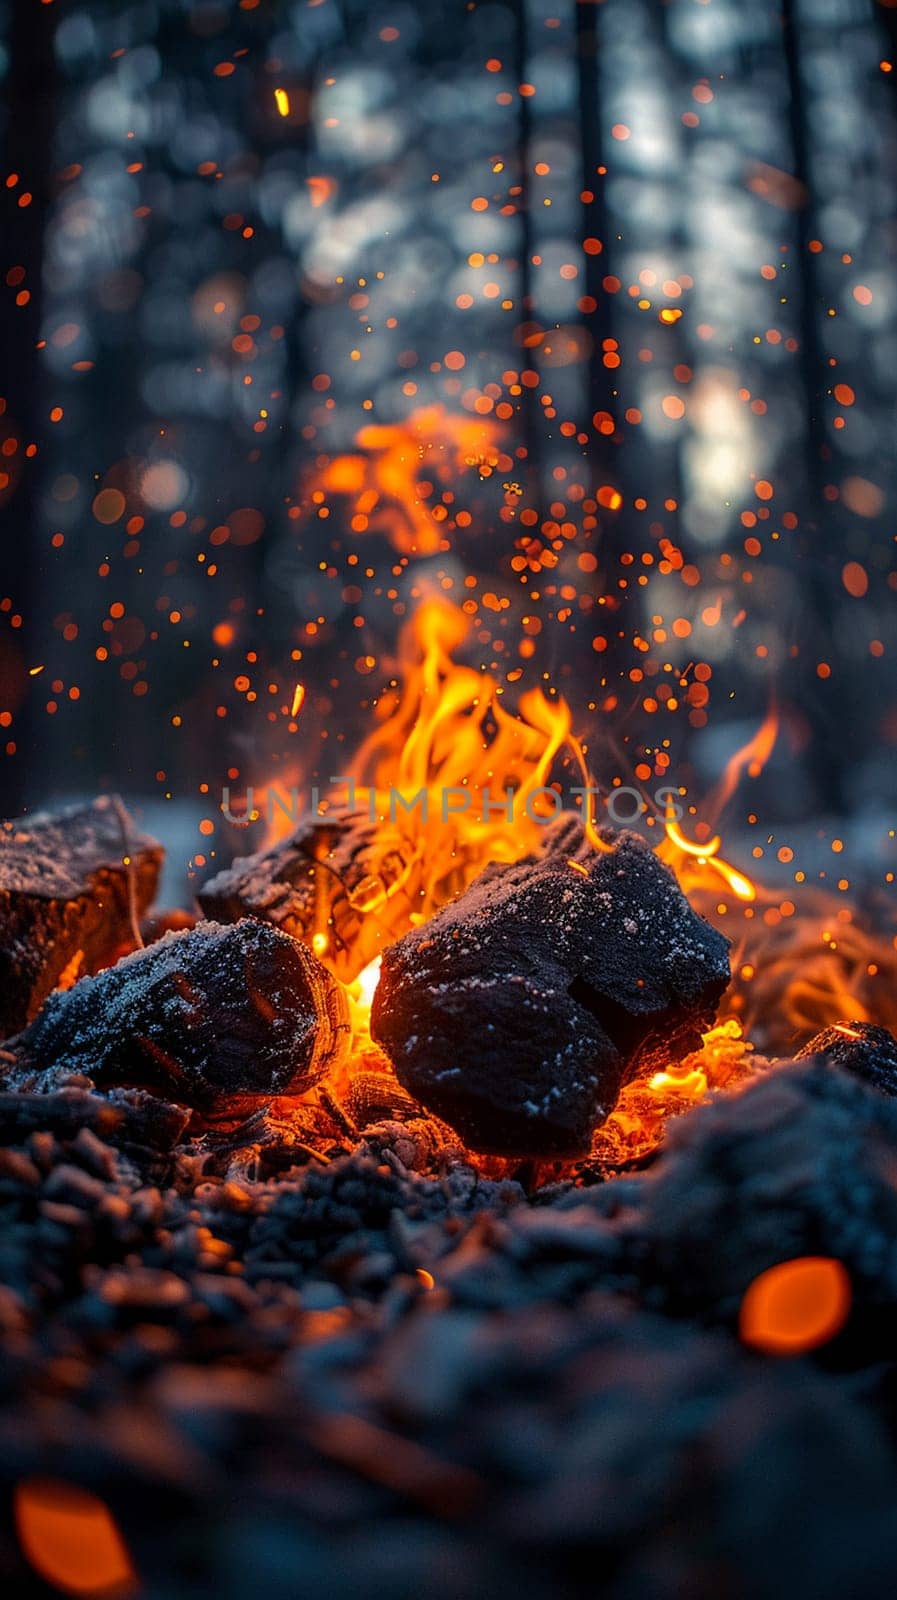 Glowing embers in a campfire, capturing warmth and adventure themes.